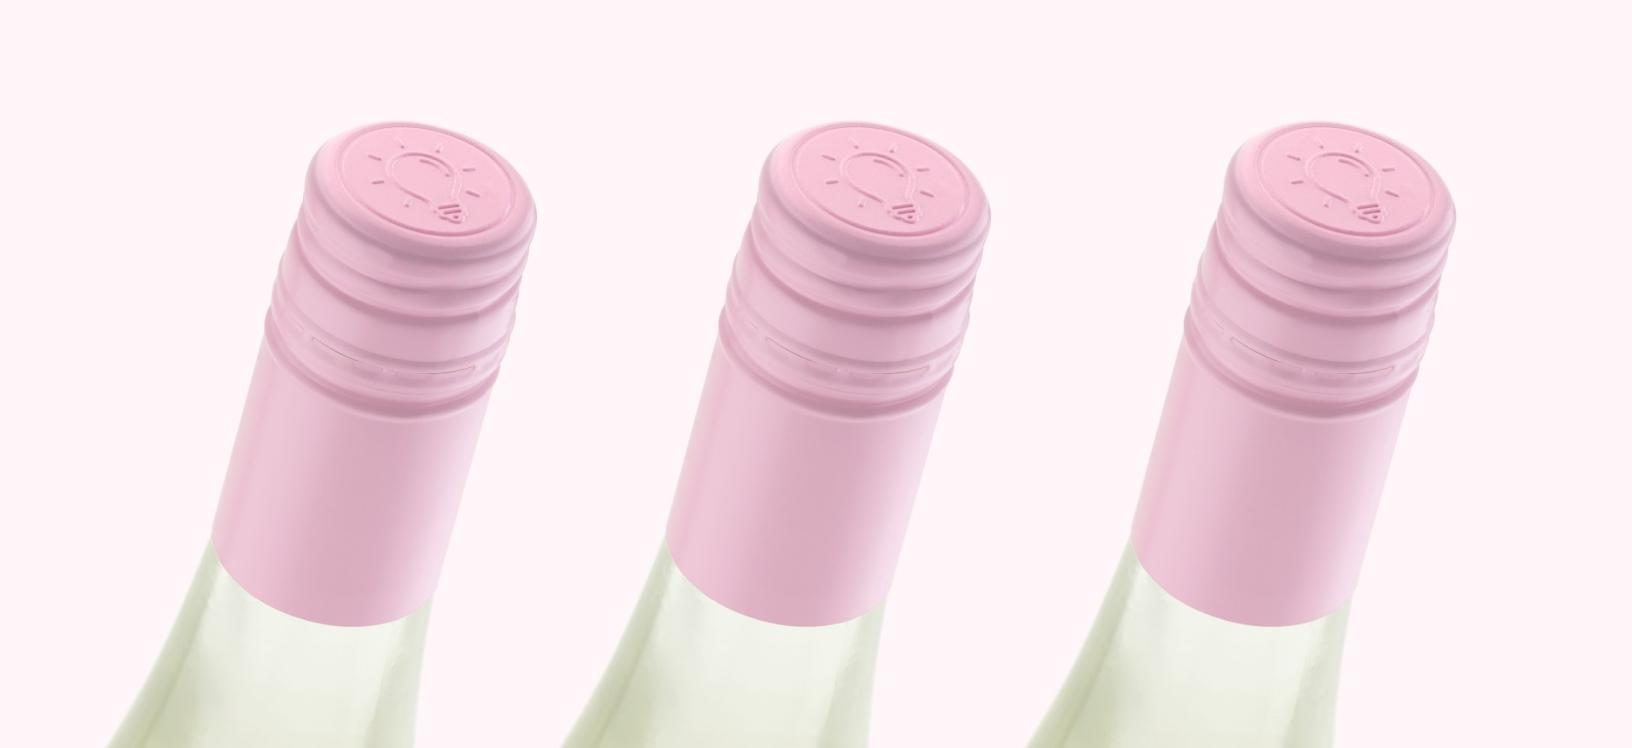 Pink wine closures on riesling bottles in a row